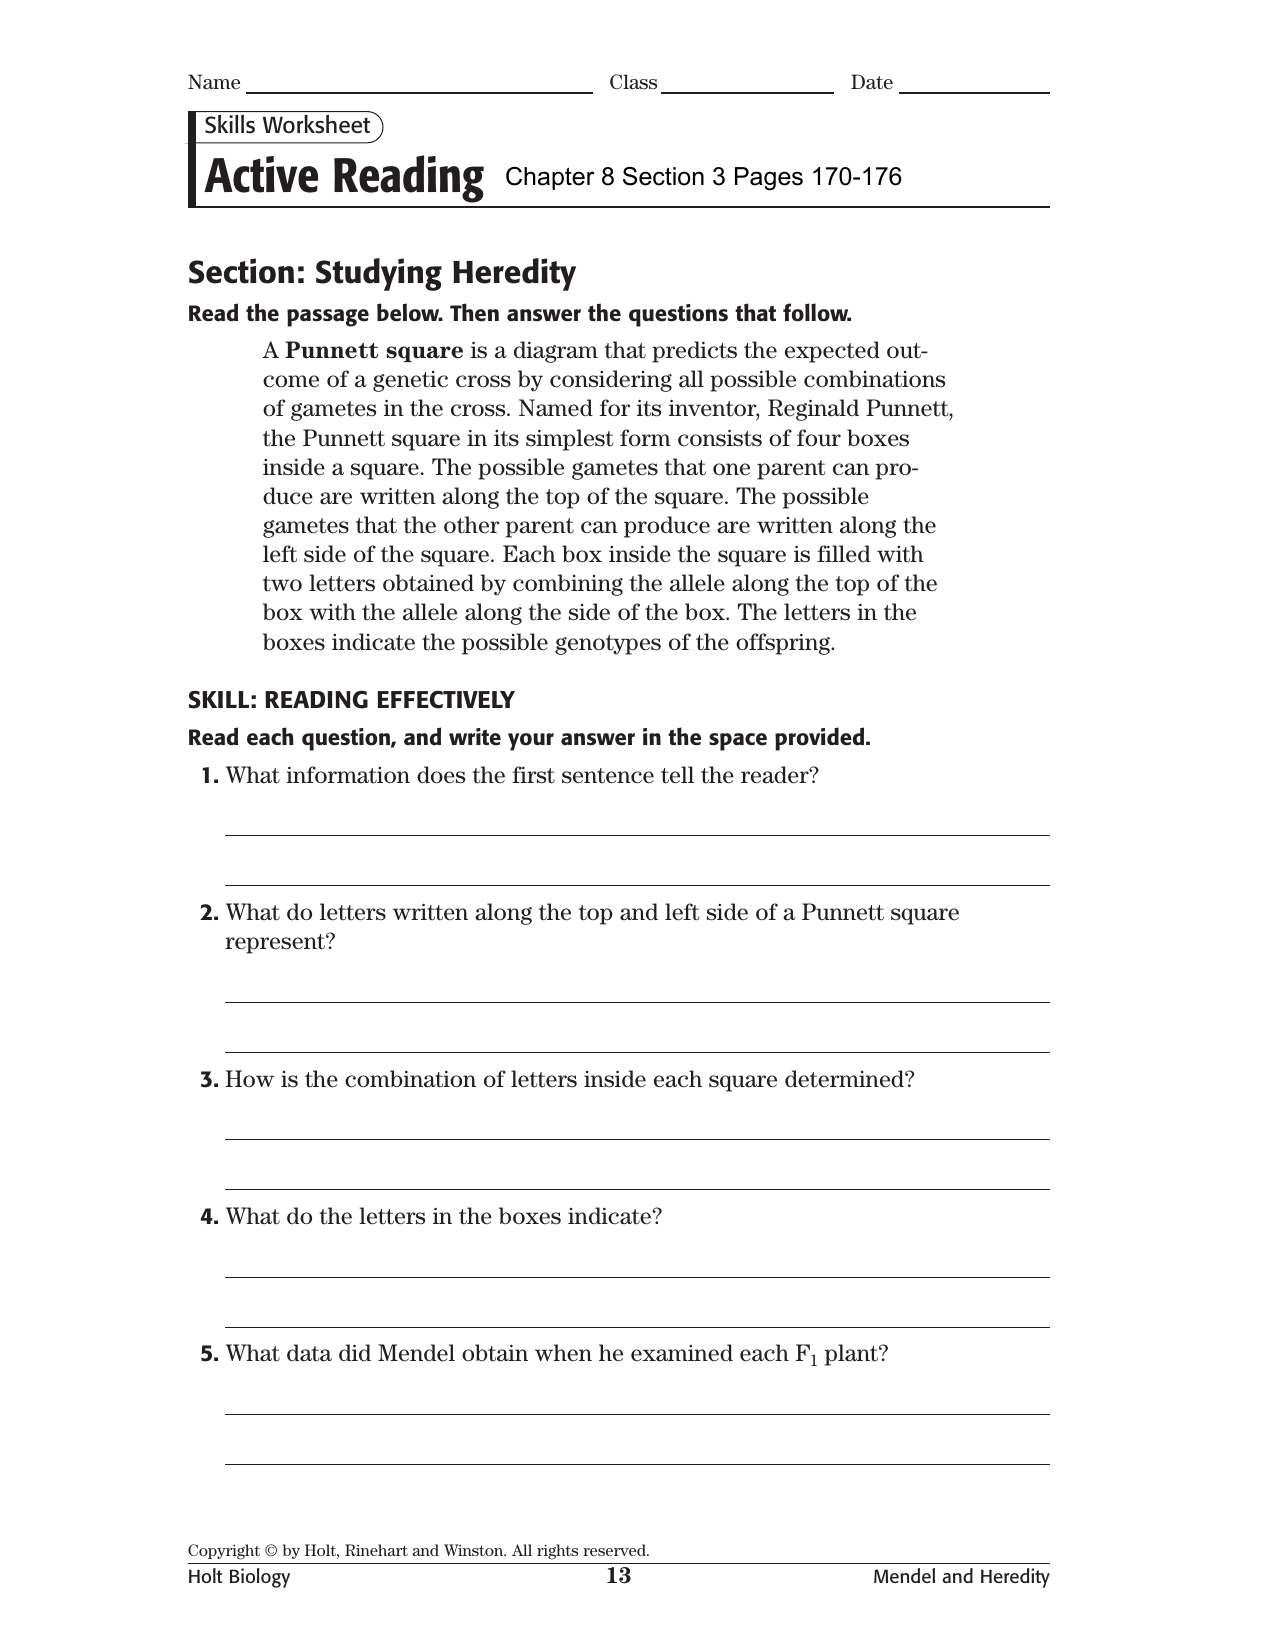 Active Reading In Skills Worksheet Active Reading